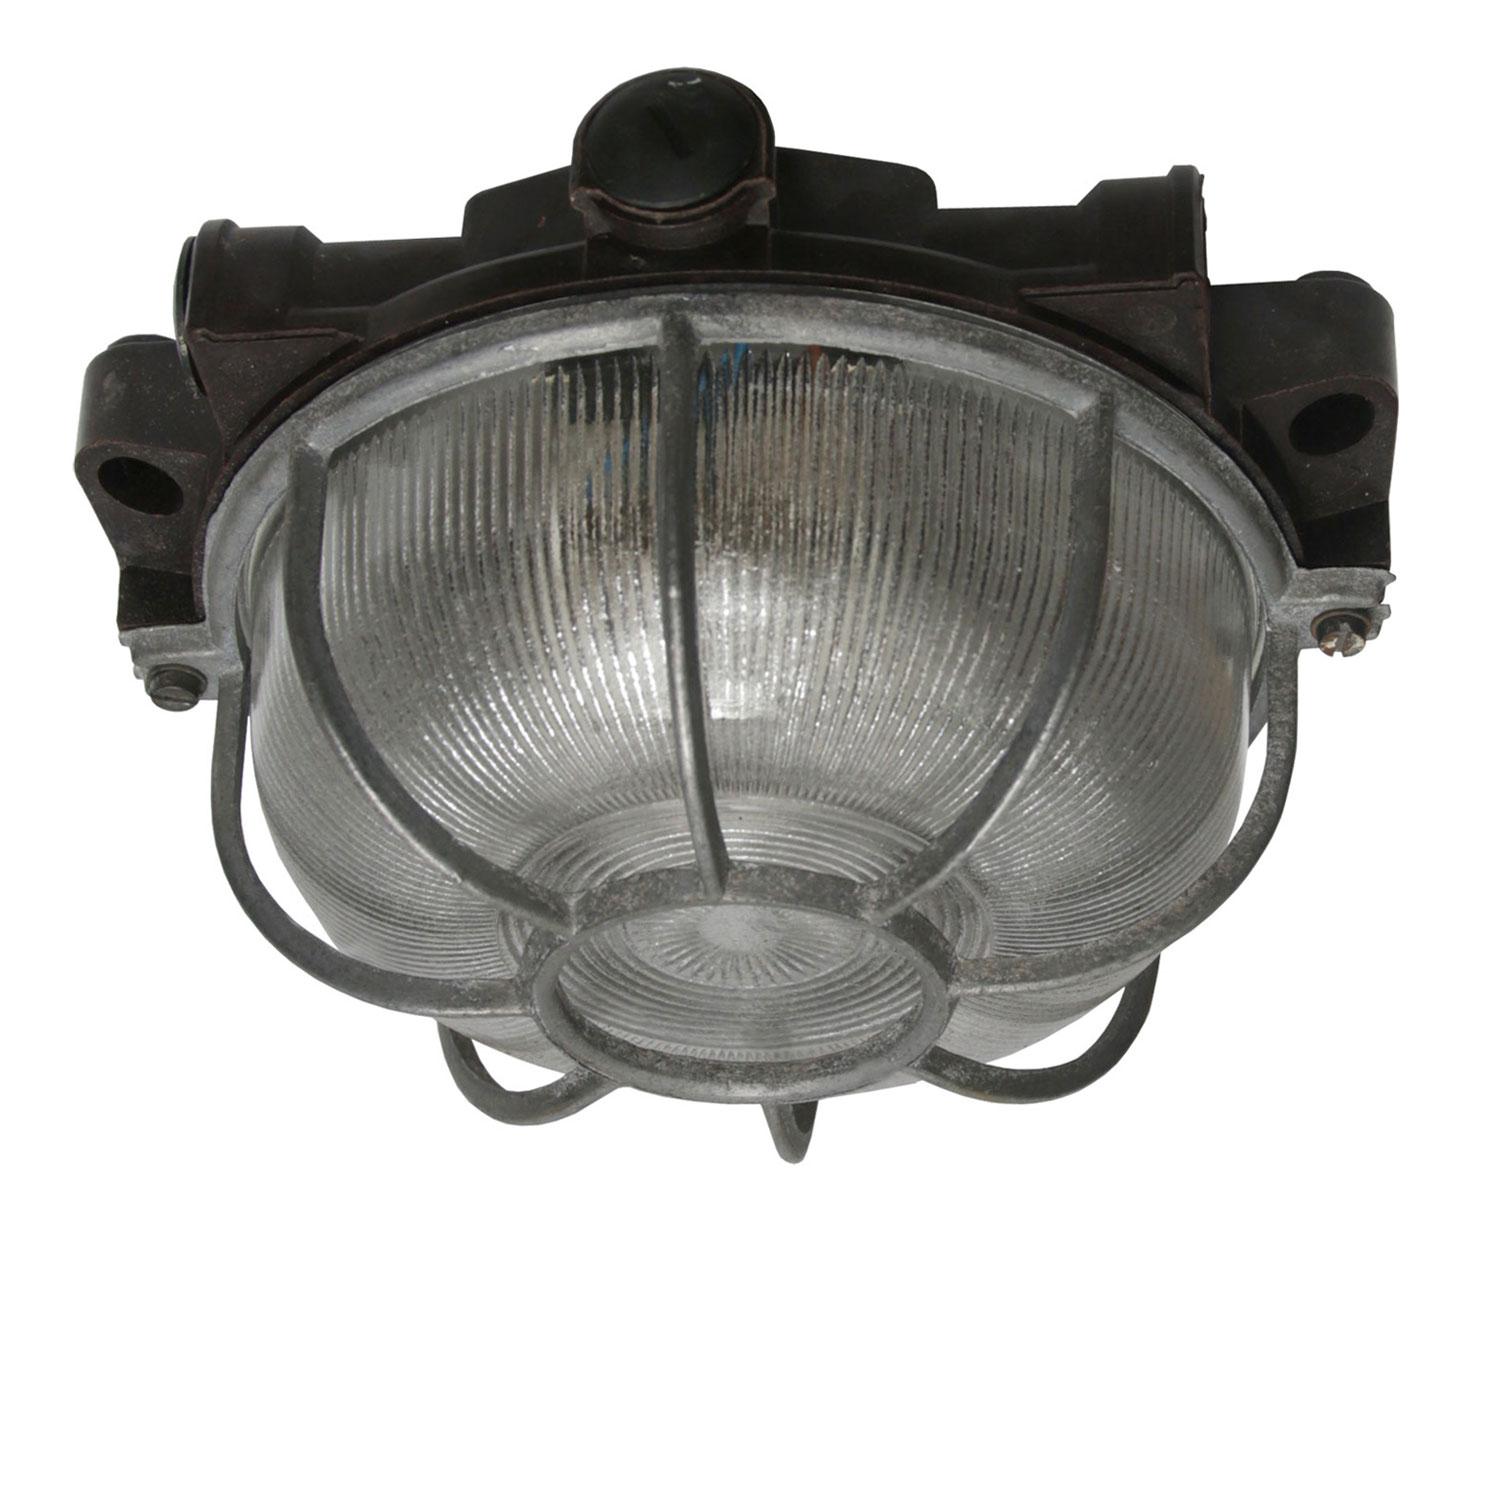 Industrial wall and ceiling scone. Bakelite back. Holophane striped glass.
Aluminium frame.

Measure: Weight 1.0 kg / 2.2 lb

Priced individual item. All lamps have been made suitable by international standards for incandescent light bulbs,